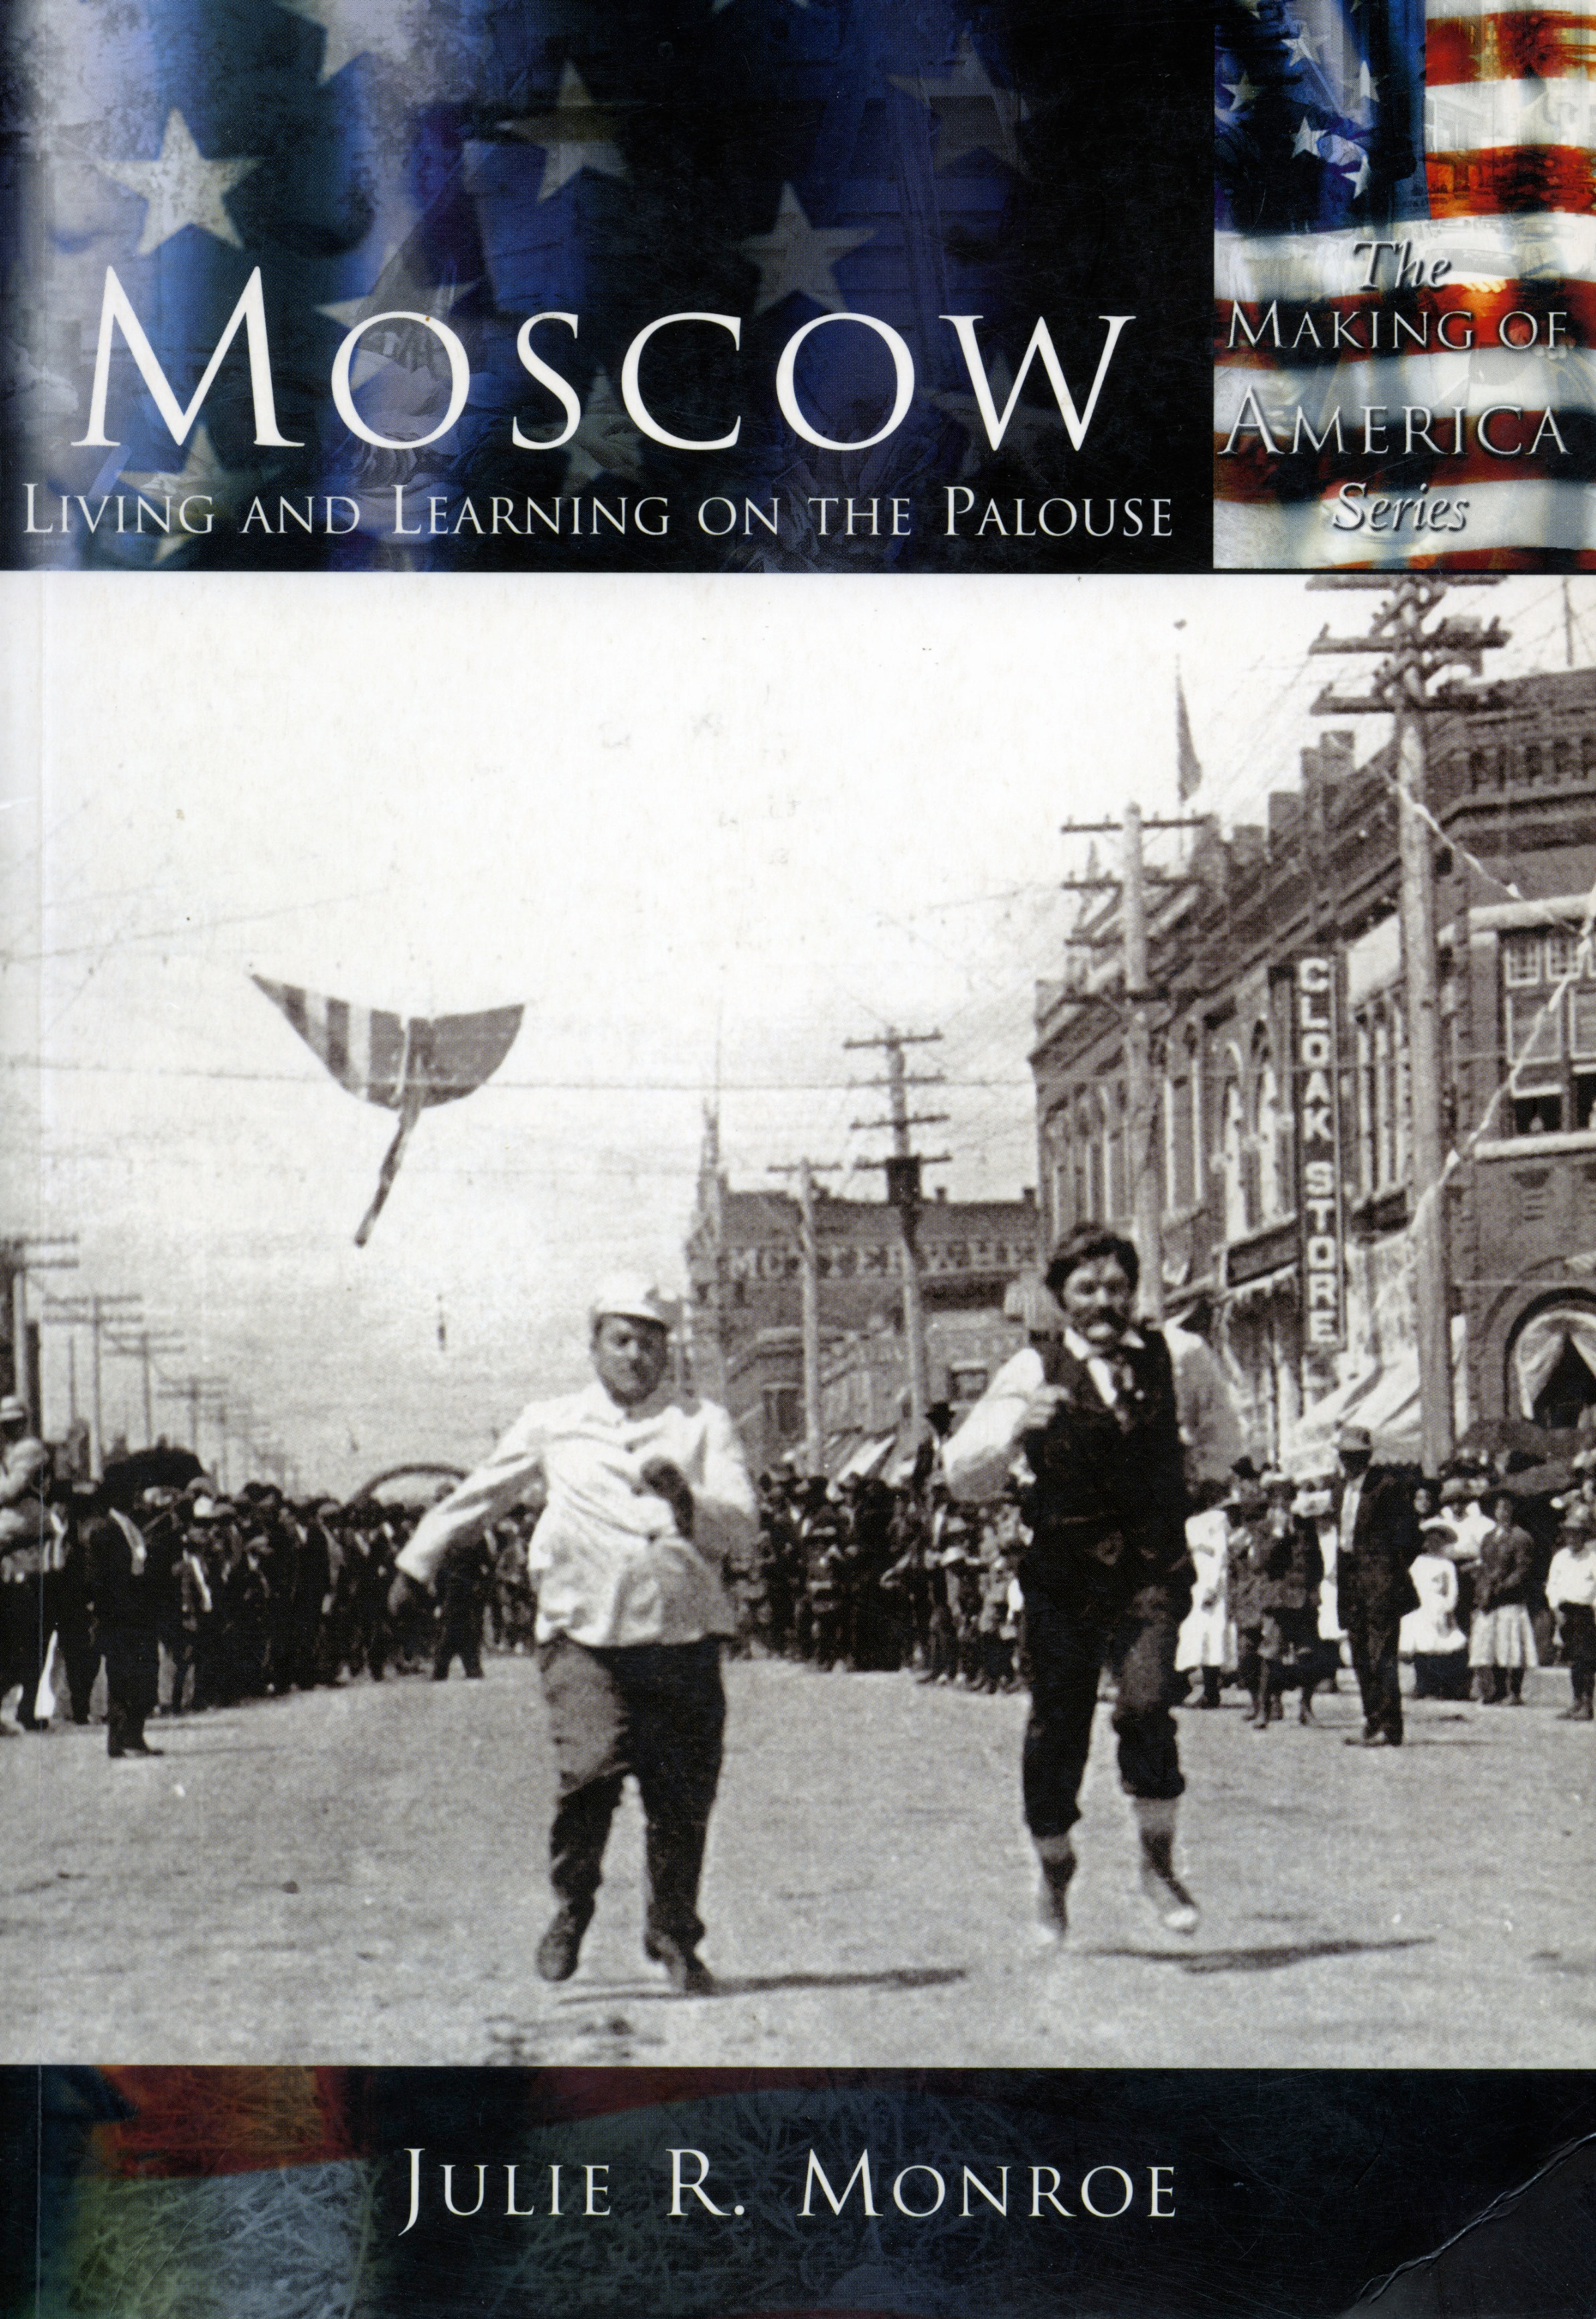 Moscow: Living and learning on the Palouse (book cover)